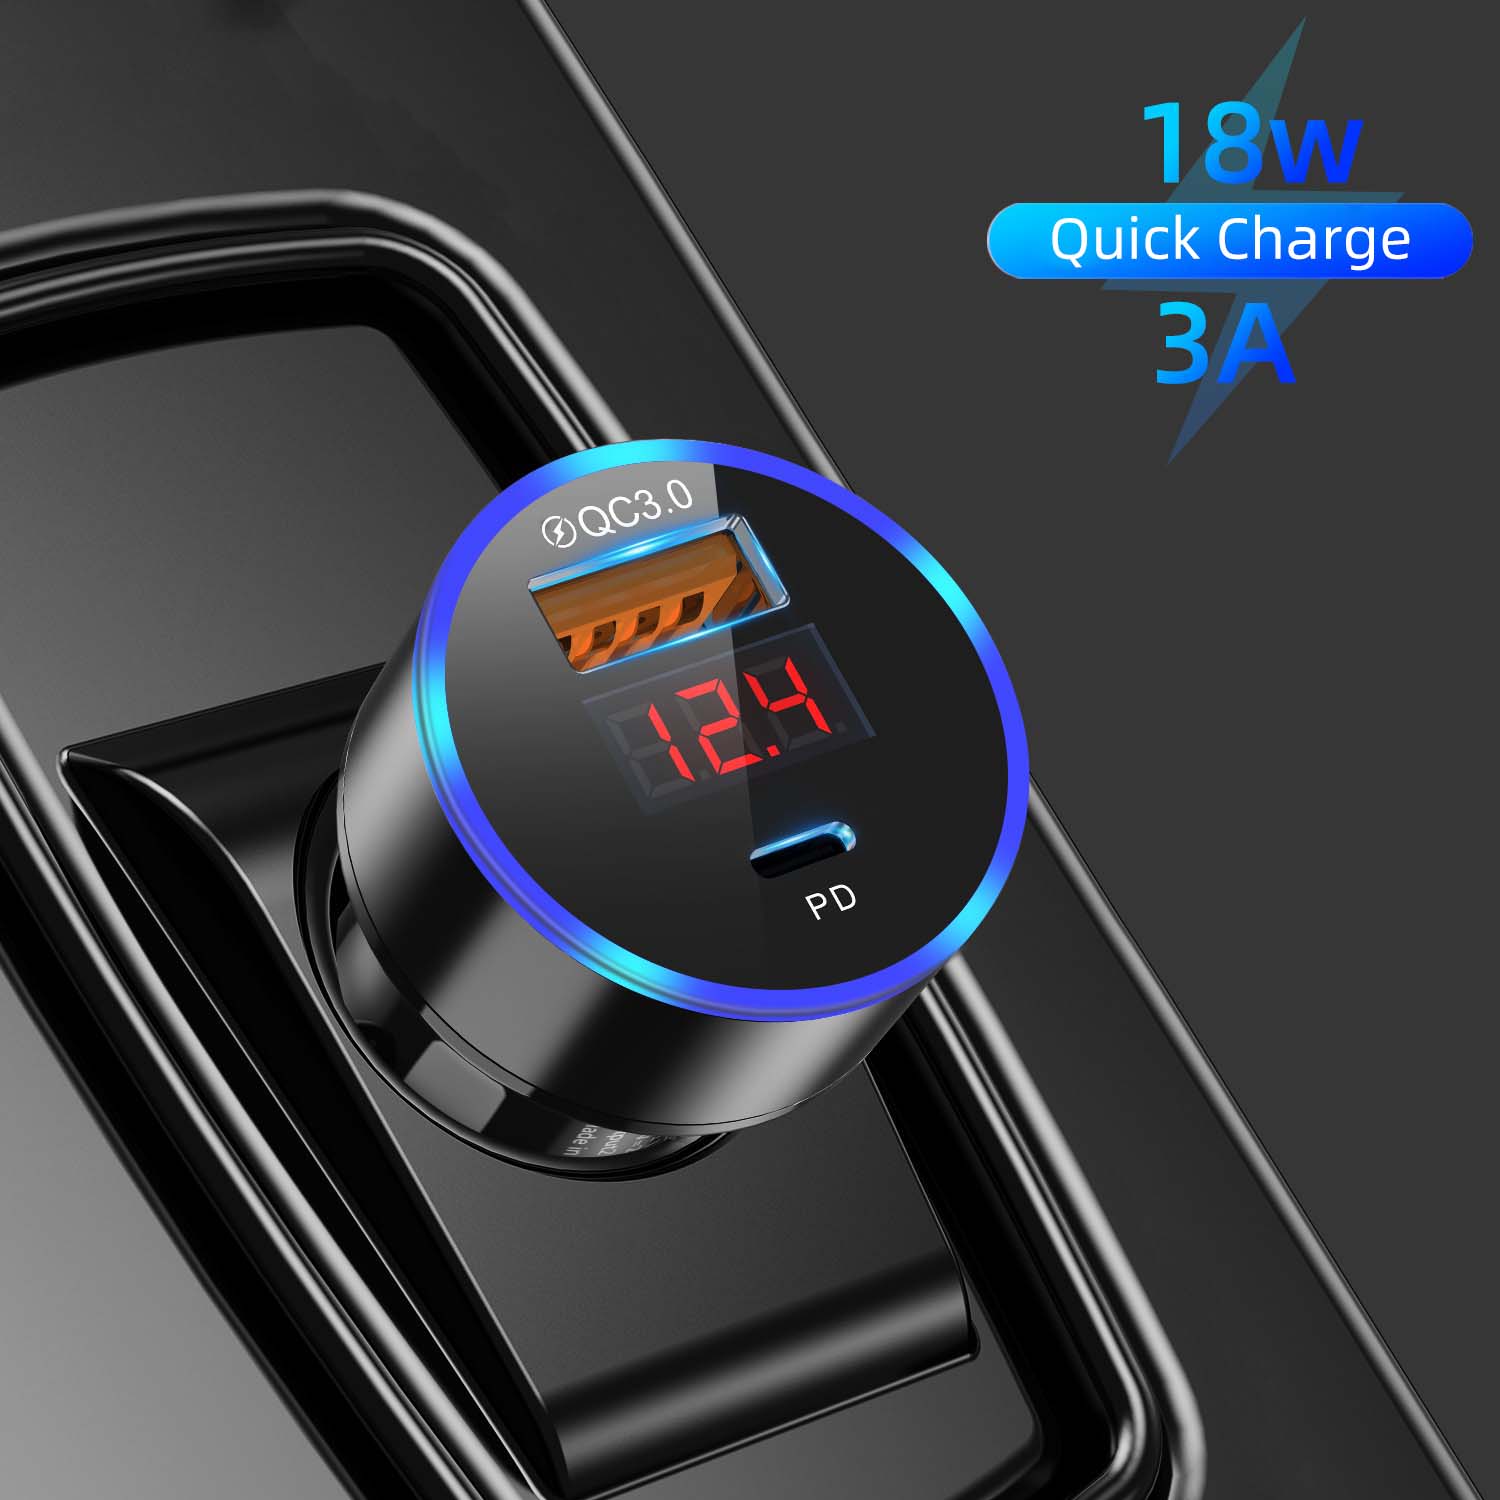 3A Led Display Usb Car Charger Voor Xiaomi Samsung Mobiele Telefoon Adapter Car Charger Voor Iphone 13 12 Pro Max 11 Huawei Redmi